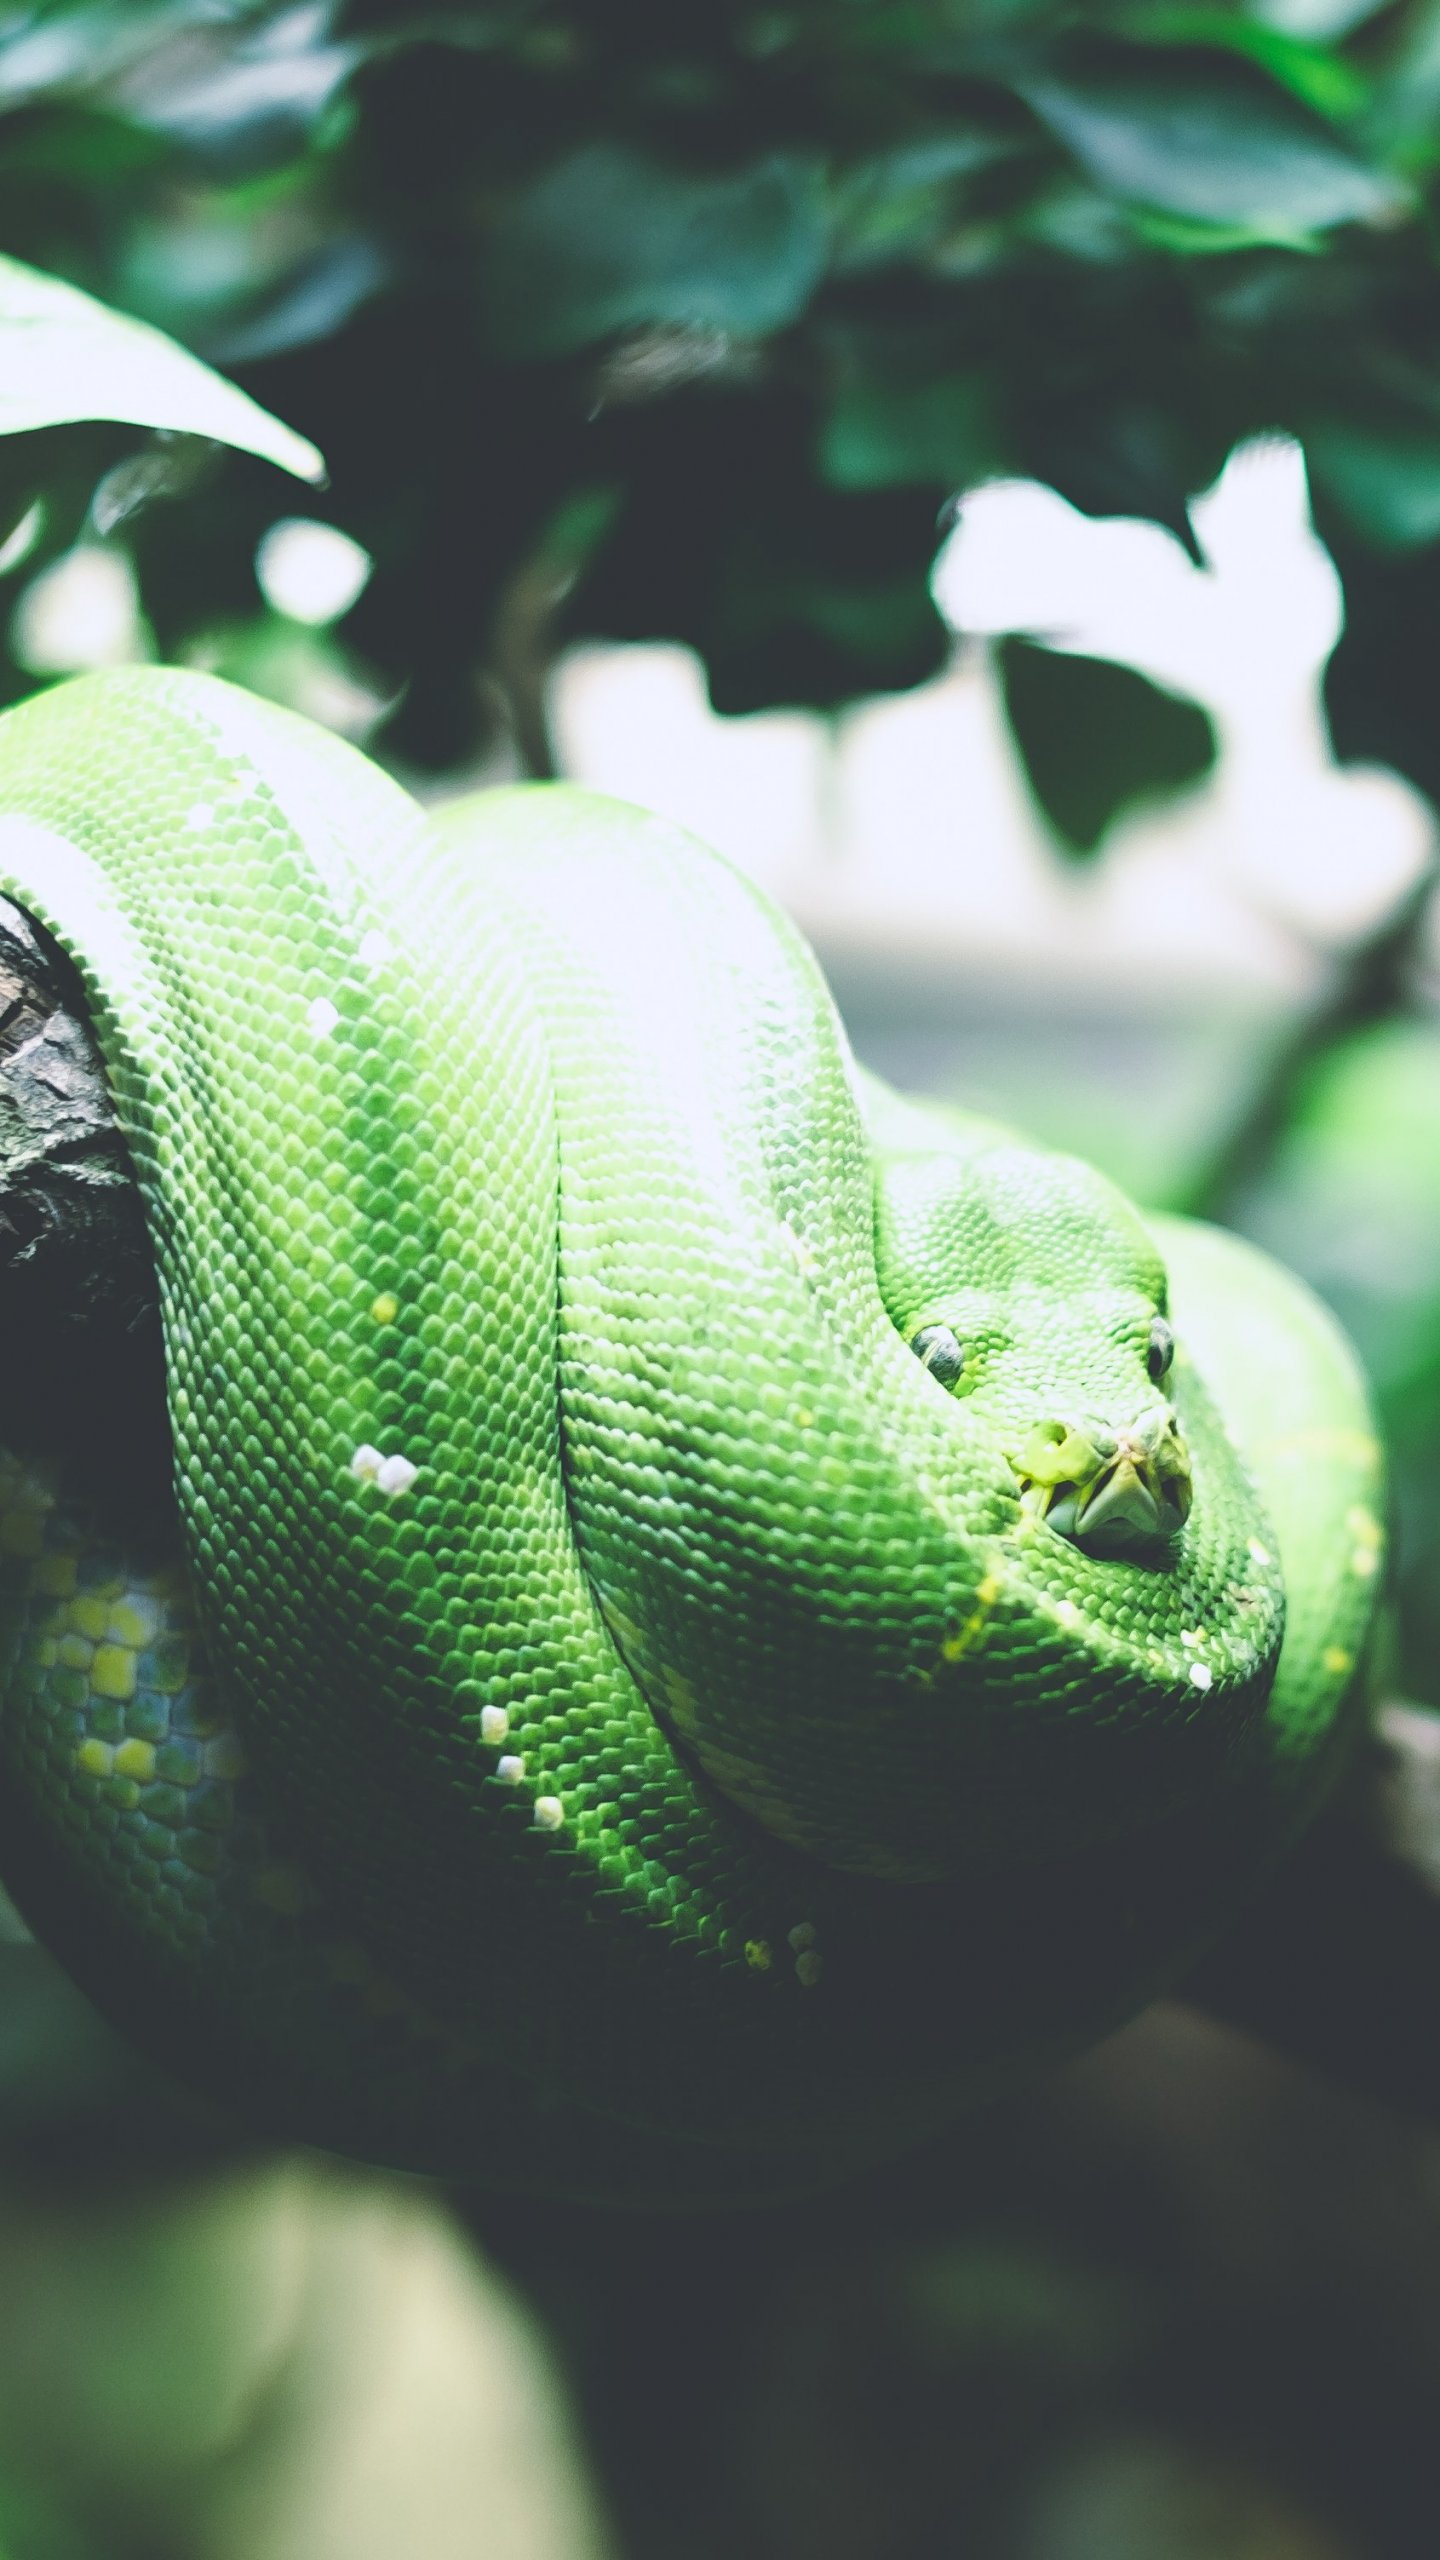 Tree Snake Wallpaper  iPhone Android  Desktop Backgrounds